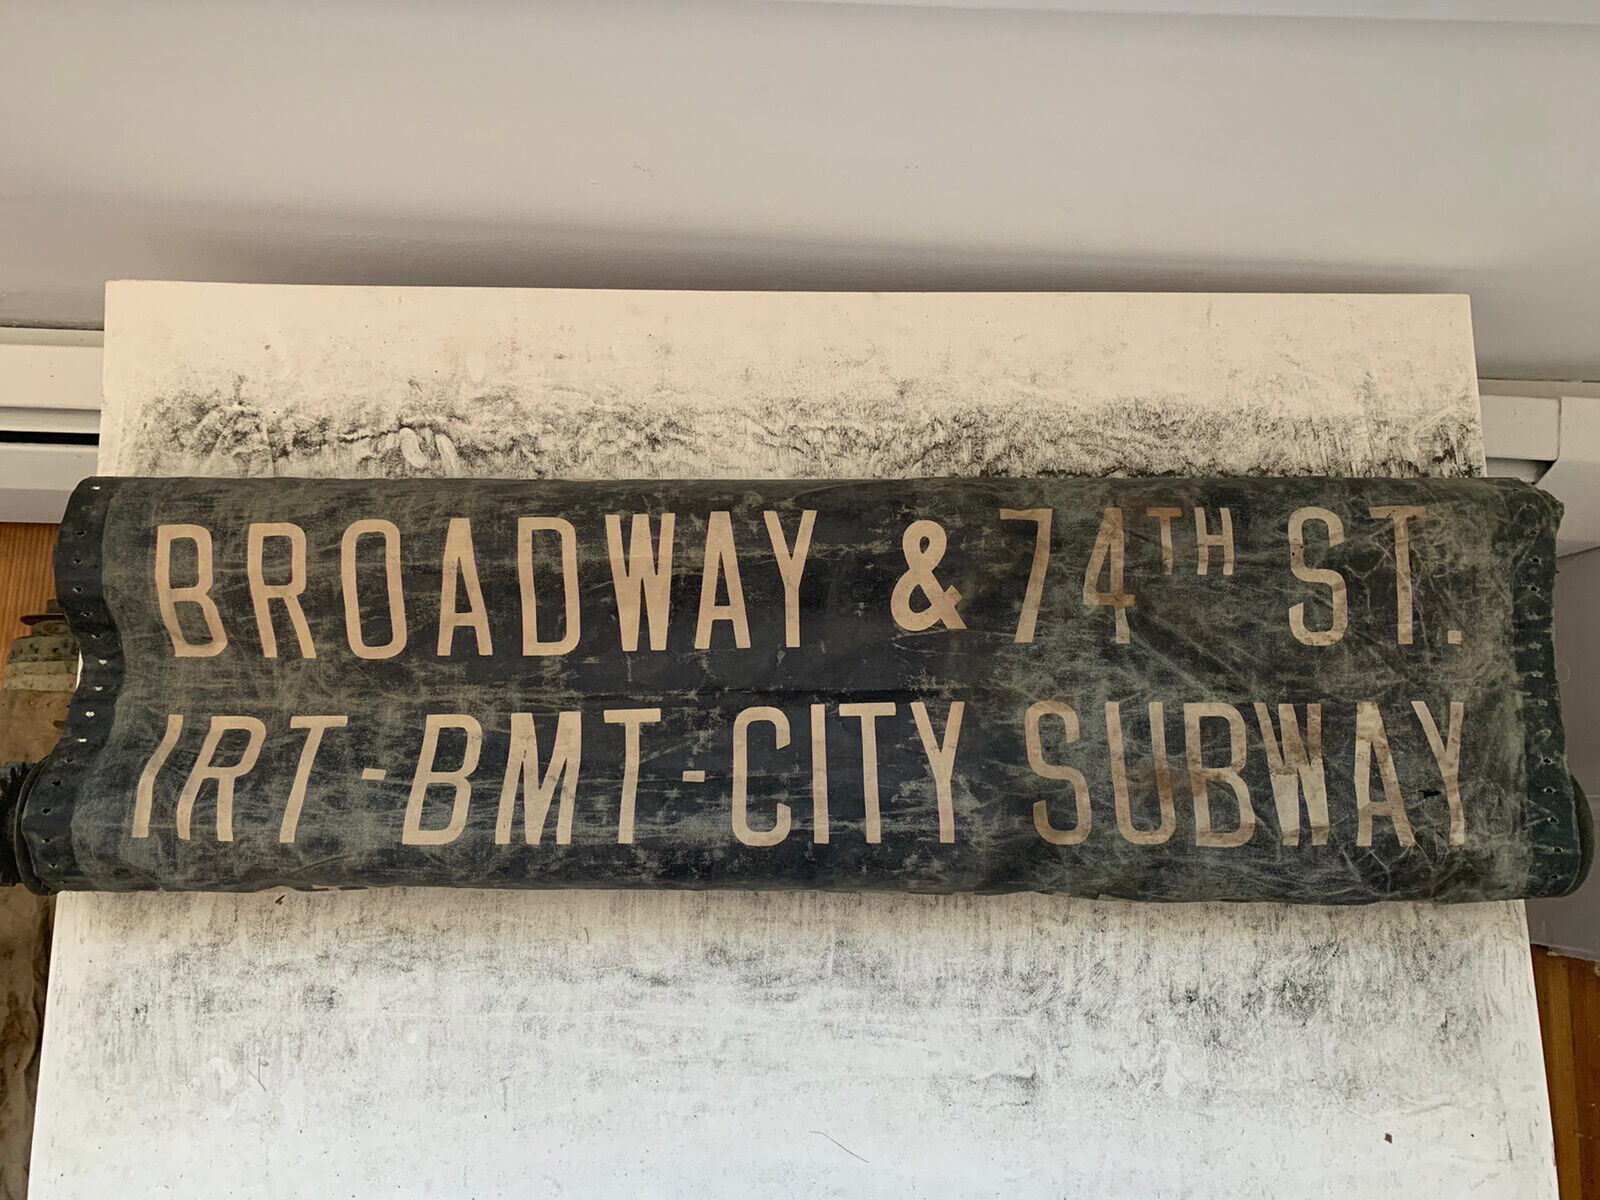 NY NYC PRIMITIVE BUS ROLL SIGN BROADWAY 74 STREET IRT BMT SUBWAY UPPER WEST SIDE